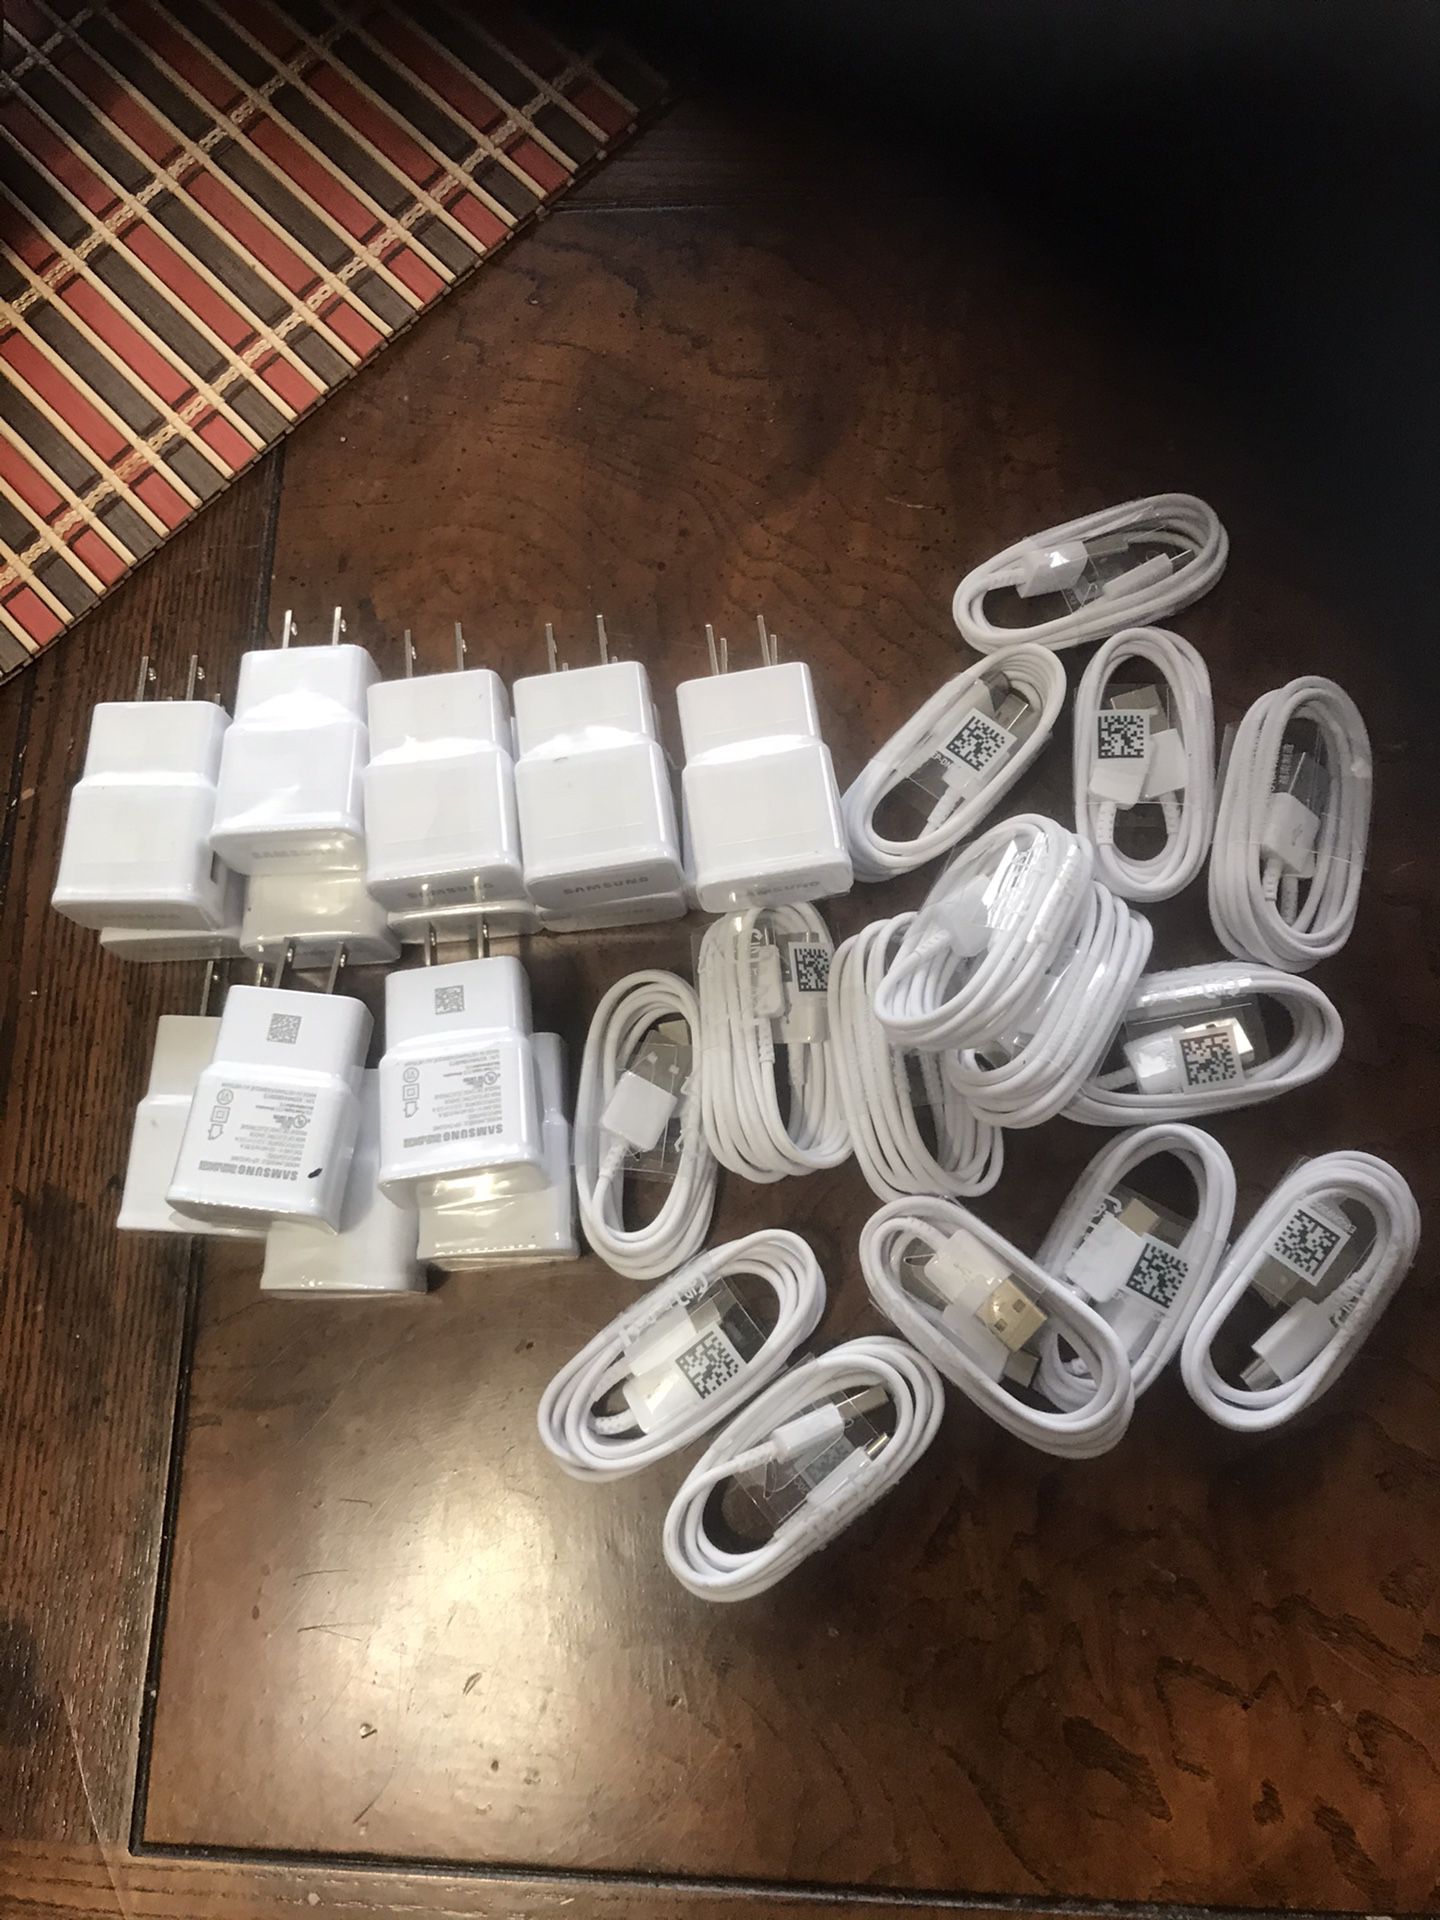 Samsung Phone or Tablet Chargers